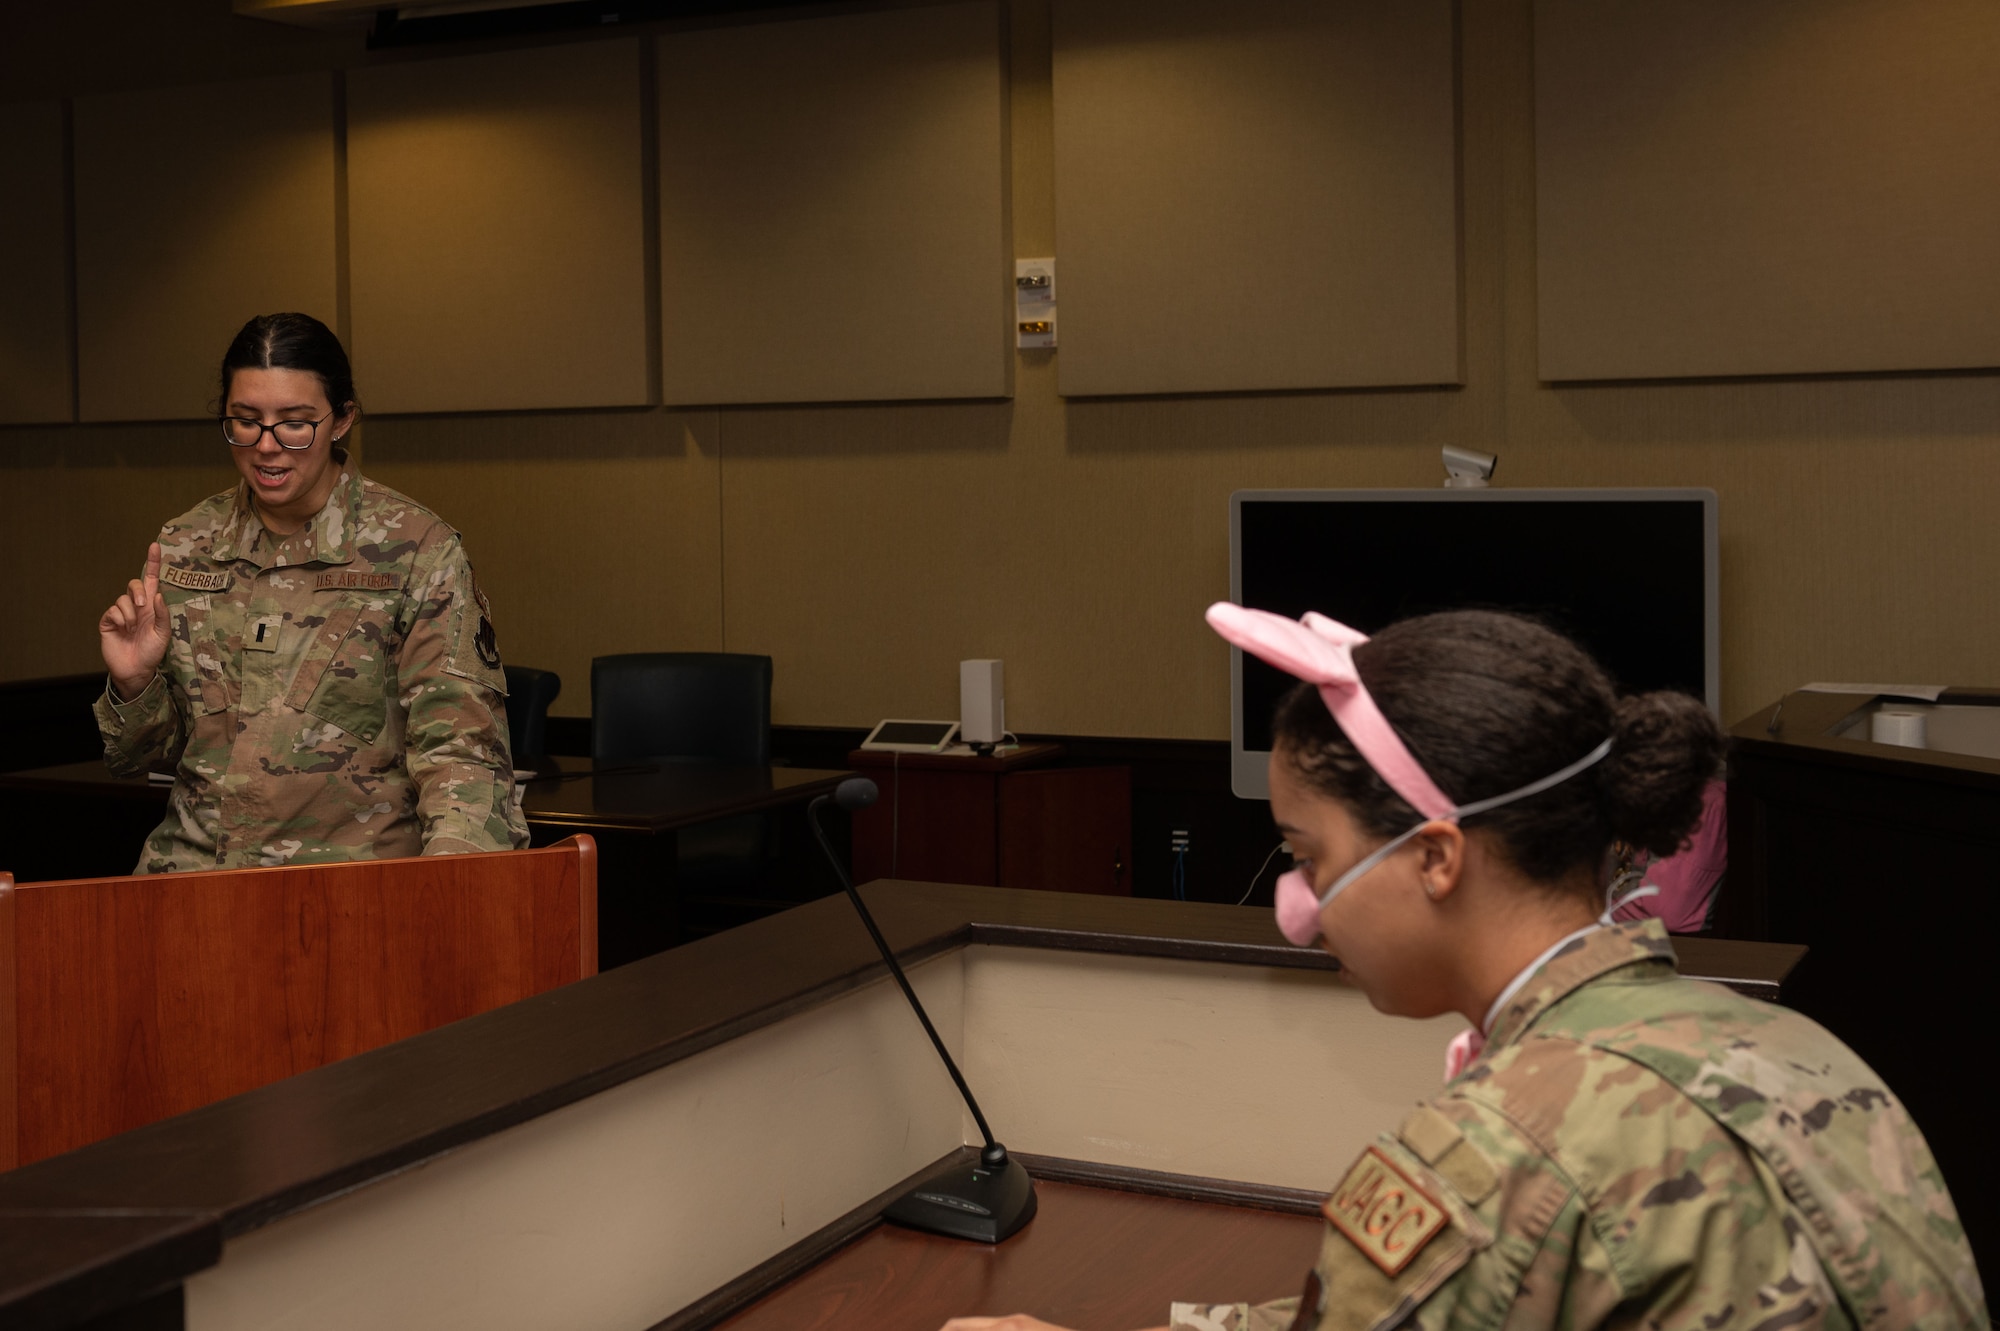 1st Lt. Carmen Flederbach, 4th Fighter Wing Judge Advocate chief discharge, cross examines Capt. Baylee McLeod, 4th FW JA chief adverse actions, during a “Big Bad Wolf” fairy tale themed mock trial at Seymour Johnson Air Force Base, North Carolina, May 1, 2023. Cross examination is when an opposing party asks questions a witness during a trial. The base invited students from Carver Heights Elementary School, Goldsboro, North Carolina, as part of Law Day, to teach them about Air Force’s legal profession. Community outreach events help the wing build relations with local communities and is an opportunity for Airmen to mentor future leaders.  (U.S. Air Force photo by Airman 1st Class Rebecca Sirimarco-Lang)